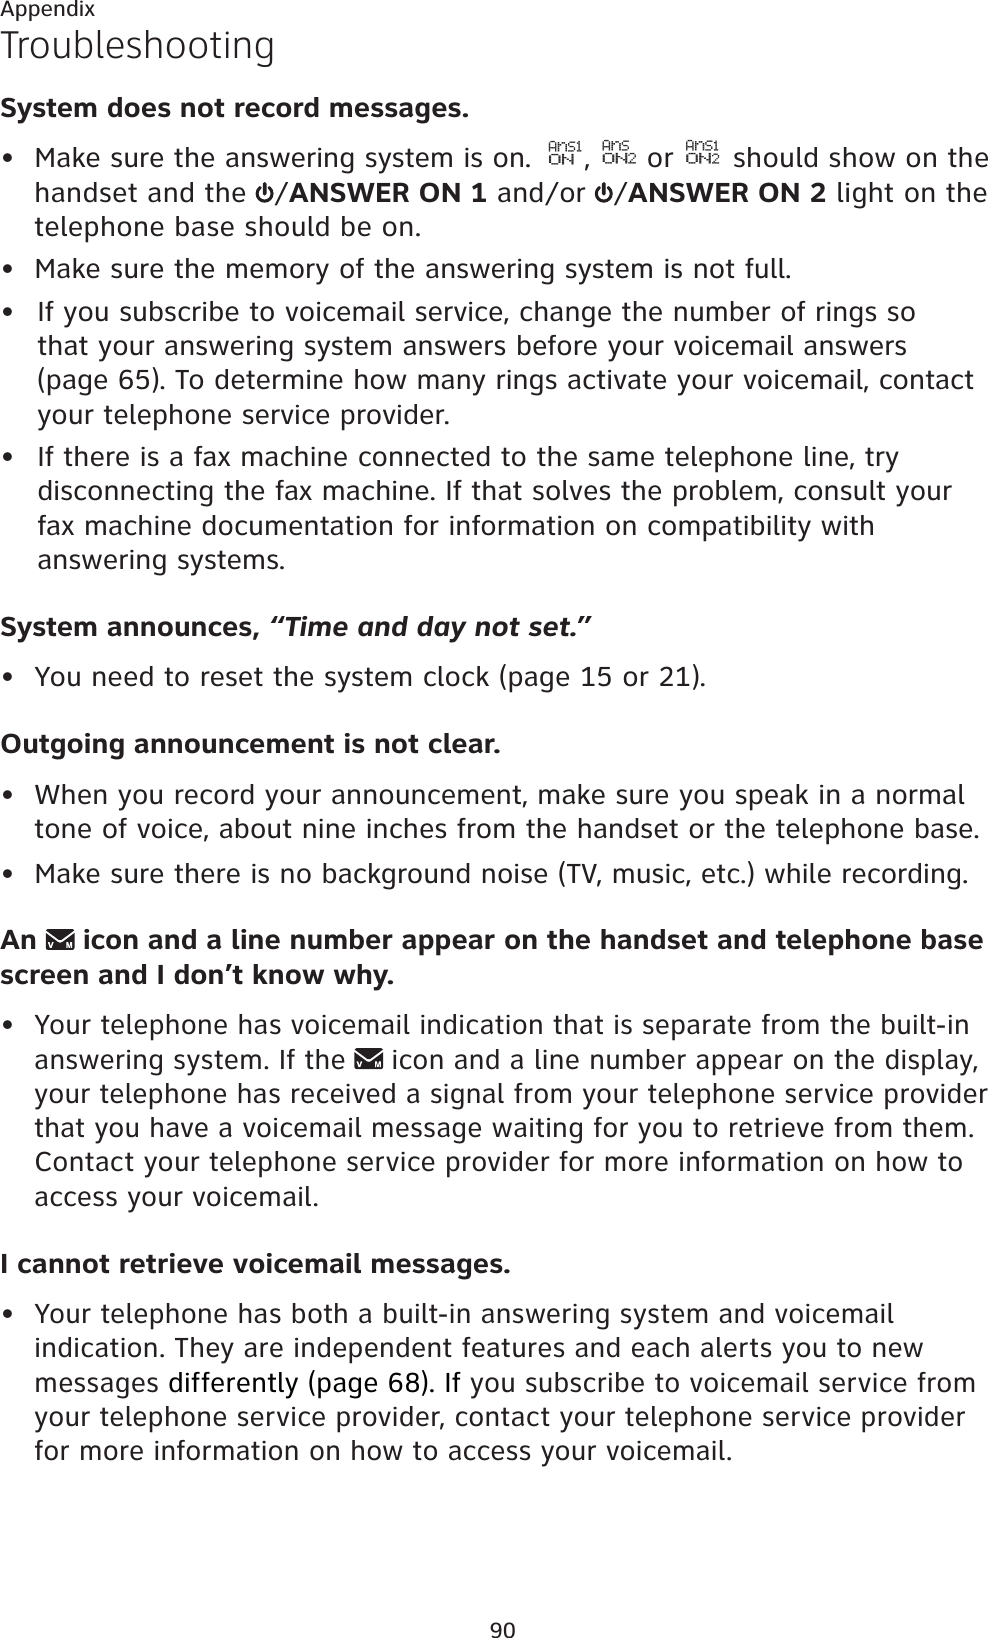 90AppendixTroubleshootingSystem does not record messages.• Make sure the answering system is on.  AnS1ON,AnSON2 or AnS1ON2 should show on the handset and the  /ANSWER ON 1 and/or  /ANSWER ON 2 light on the telephone base should be on.• Make sure the memory of the answering system is not full.If you subscribe to voicemail service, change the number of rings so that your answering system answers before your voicemail answers (page 65). To determine how many rings activate your voicemail, contact your telephone service provider.If there is a fax machine connected to the same telephone line, try disconnecting the fax machine. If that solves the problem, consult your fax machine documentation for information on compatibility with answering systems.System announces, “Time and day not set.”• You need to reset the system clock (page 15 or 21).Outgoing announcement is not clear.• When you record your announcement, make sure you speak in a normal tone of voice, about nine inches from the handset or the telephone base.• Make sure there is no background noise (TV, music, etc.) while recording.An  icon and a line number appear on the handset and telephone base screen and I don’t know why.•Your telephone has voicemail indication that is separate from the built-in answering system. If the icon and a line number appear on the display, your telephone has received a signal from your telephone service provider that you have a voicemail message waiting for you to retrieve from them. Contact your telephone service provider for more information on how to access your voicemail.I cannot retrieve voicemail messages.•Your telephone has both a built-in answering system and voicemail indication. They are independent features and each alerts you to new messages differently (page 68). If you subscribe to voicemail service from your telephone service provider, contact your telephone service provider for more information on how to access your voicemail.••